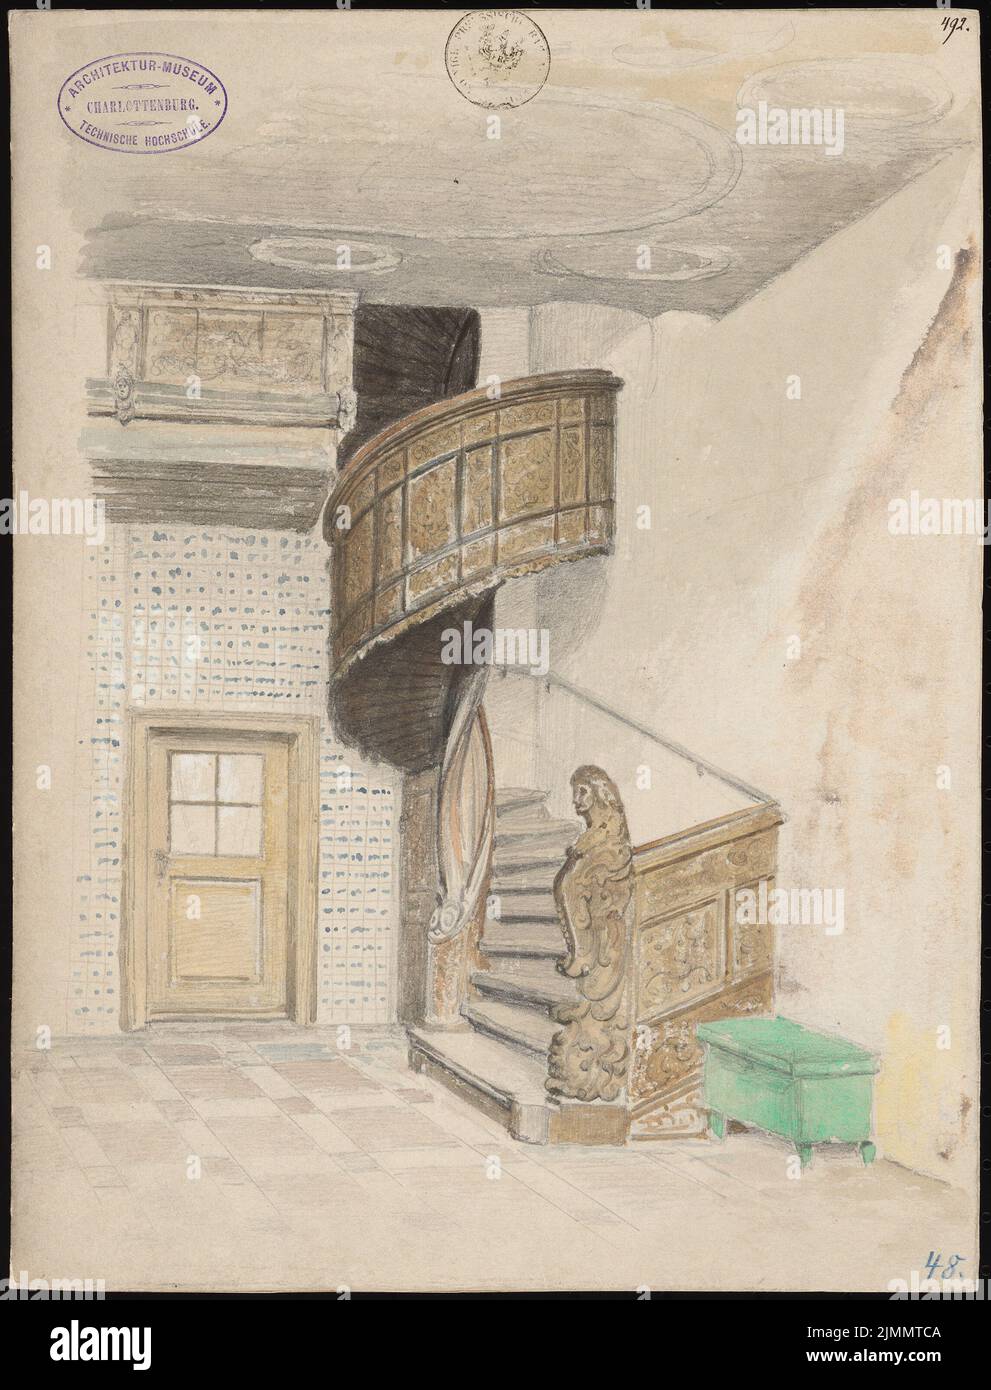 Beckmann Carl (1799-1859), room with spiral staircase, Gdansk (without dat.): Perspective inner view. Pencil watercolor on the box, 34.3 x 26.2 cm (including scan edges) Stock Photo